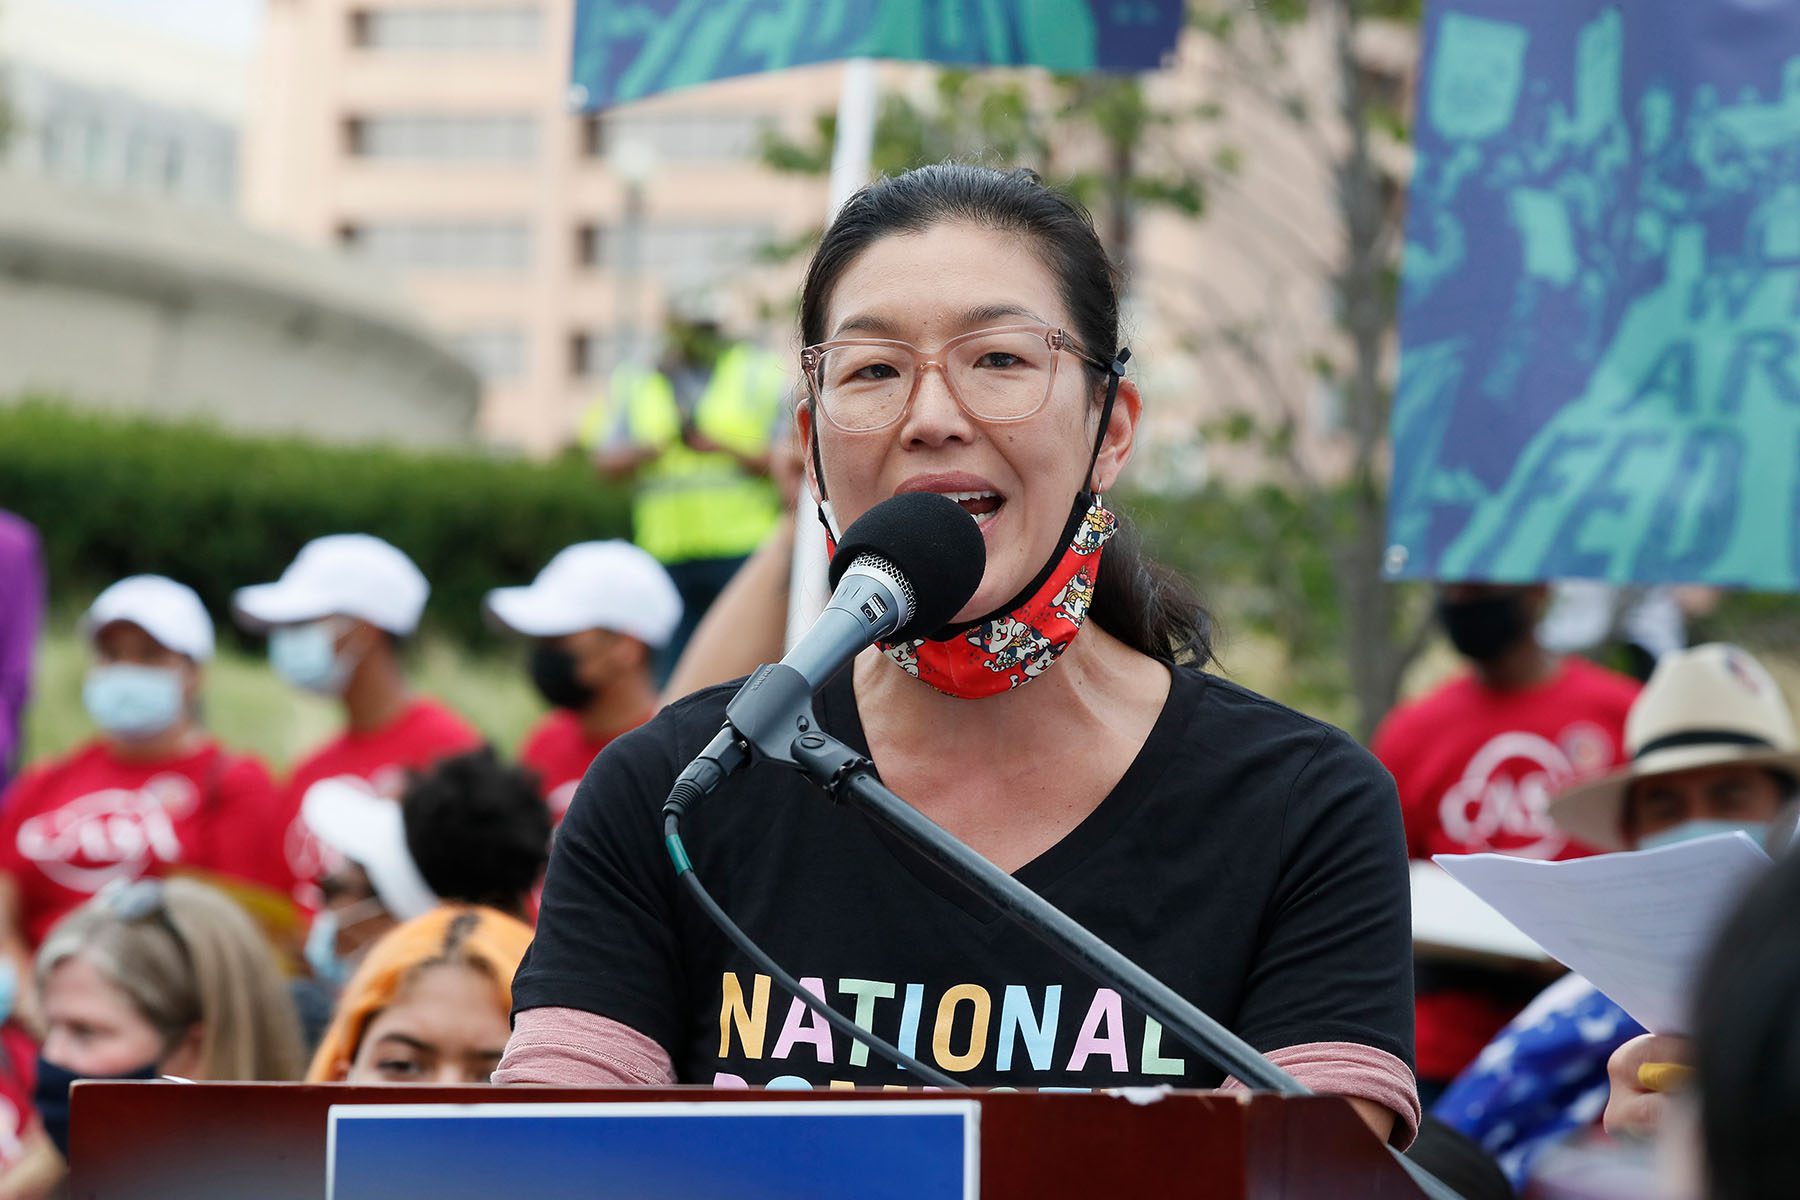 Ai-jen Poo speaks at a rally.